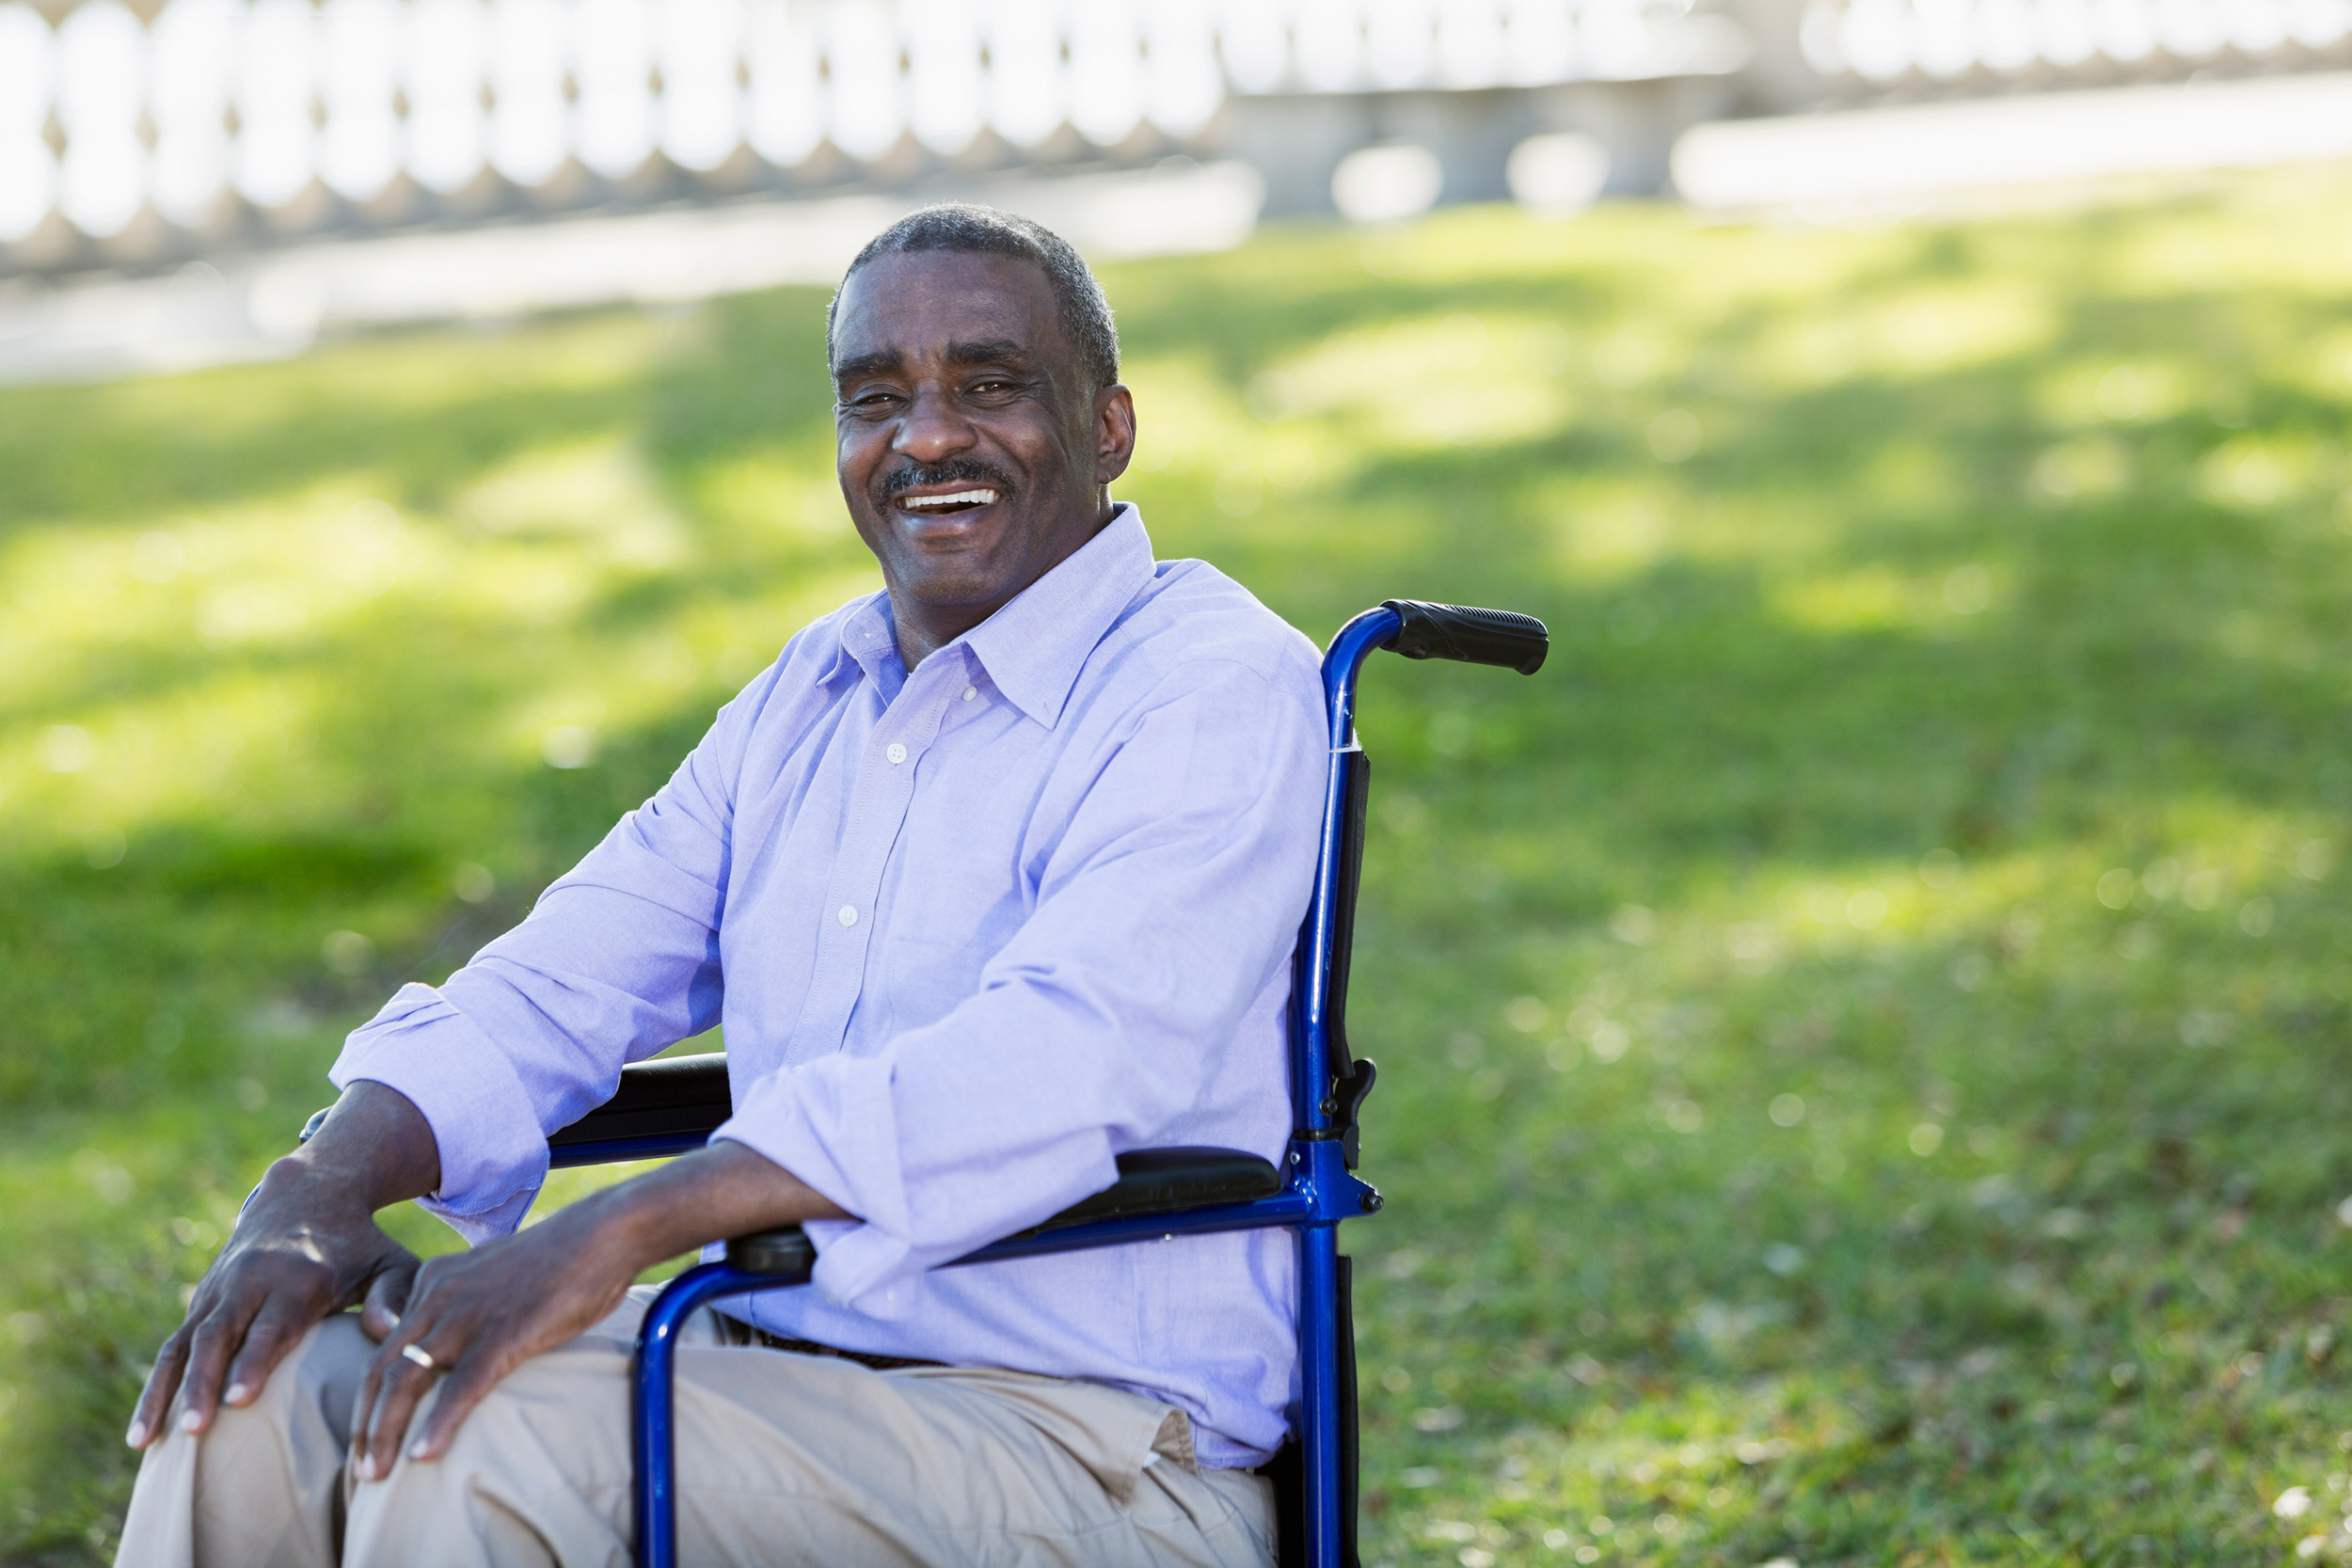 A man smiles as he sits in his wheelchair in a park. Supplemental Security Income (SSI) provides disability benefits for people with limited financial means.